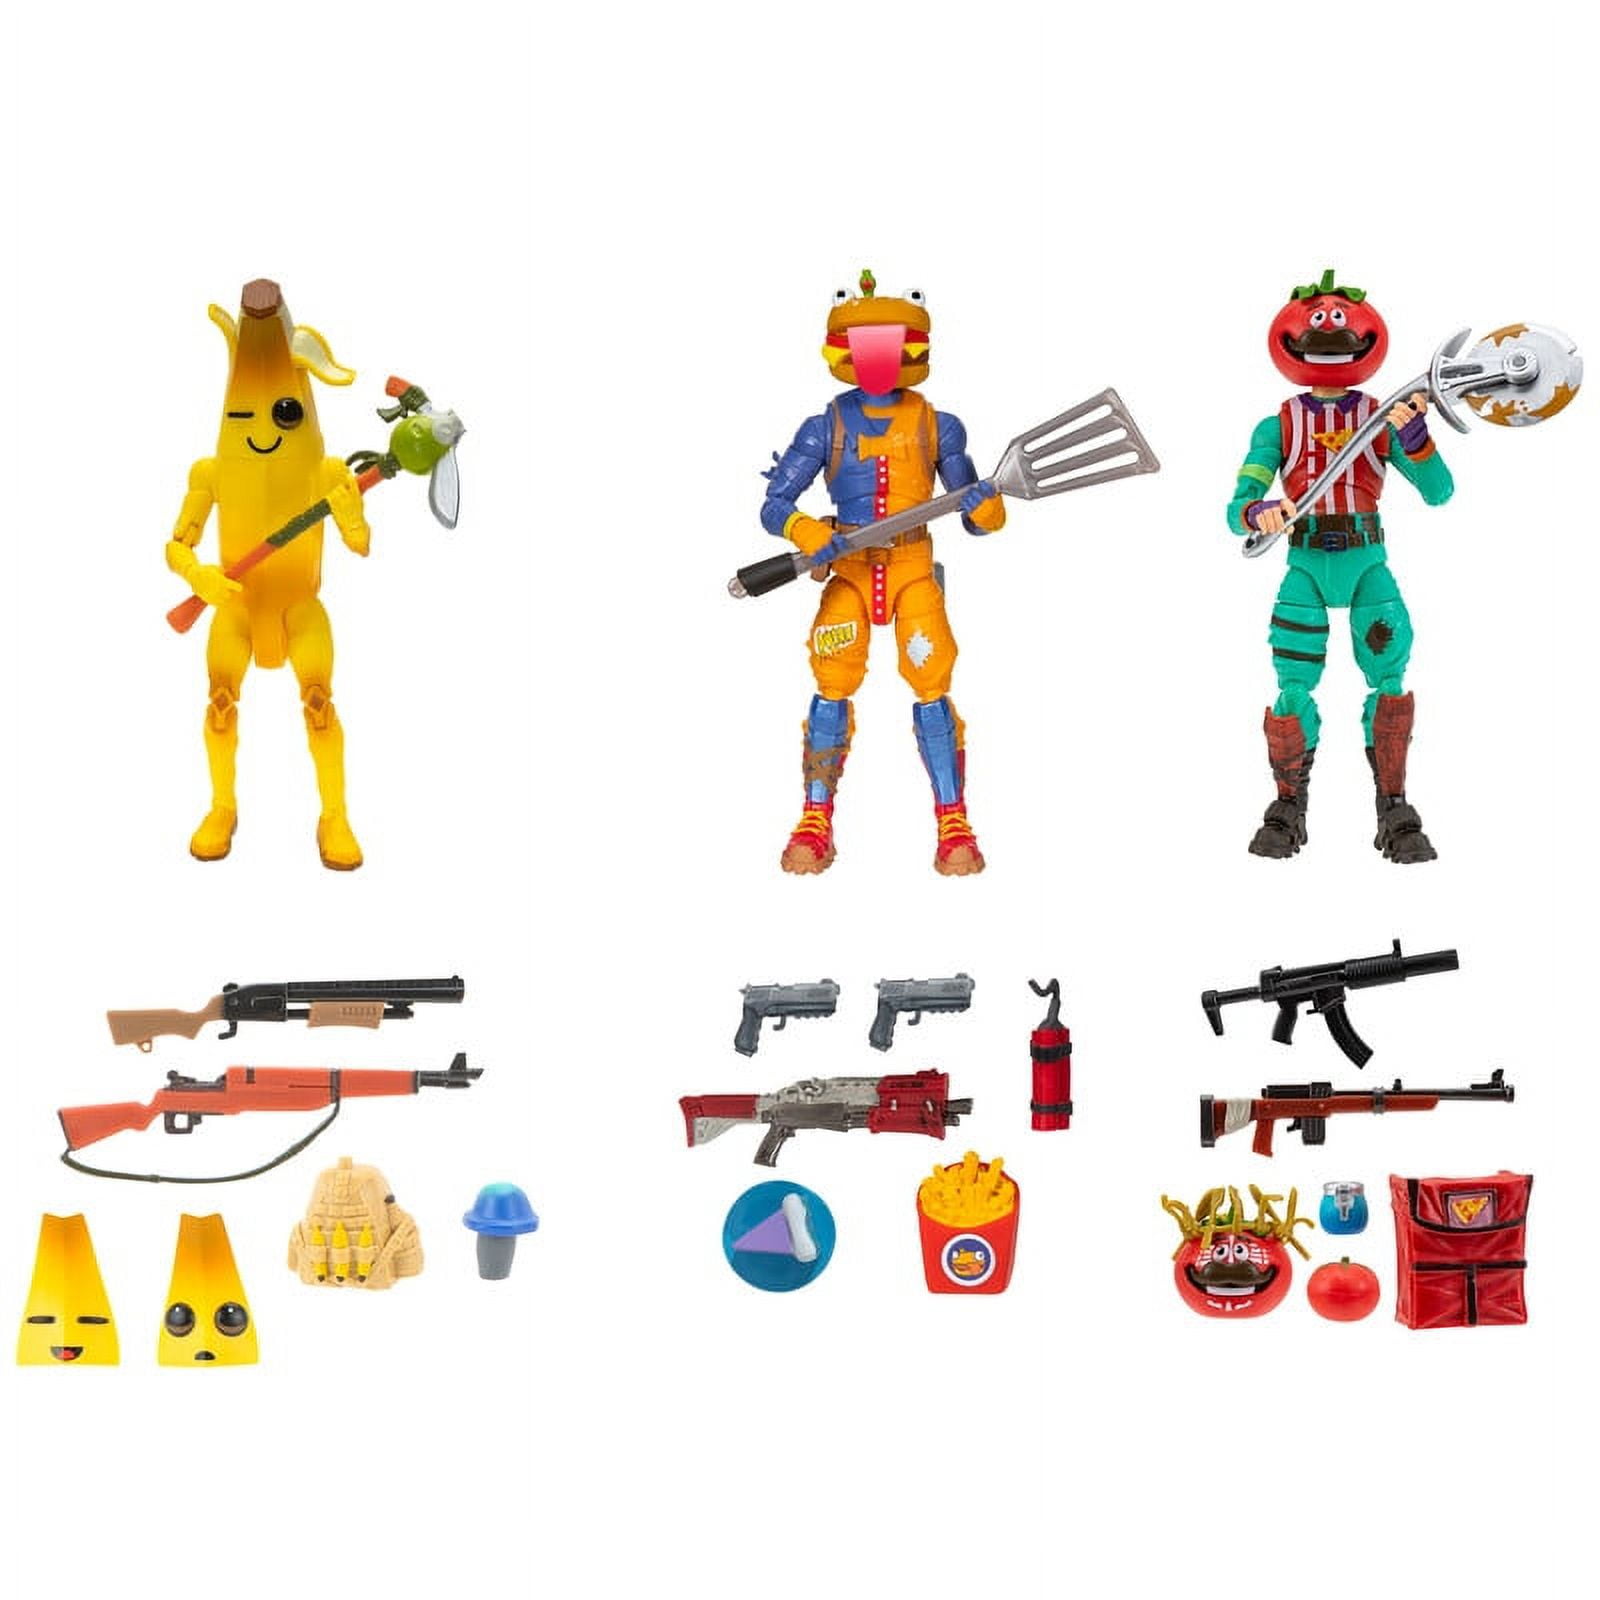 3-Pack Fortnite Legendary Series Trio Mode 6" Action Figures (Peely, Tomato Head, and Beef Boss) + Free Shipping w/ Walmart+ or $35+ $10